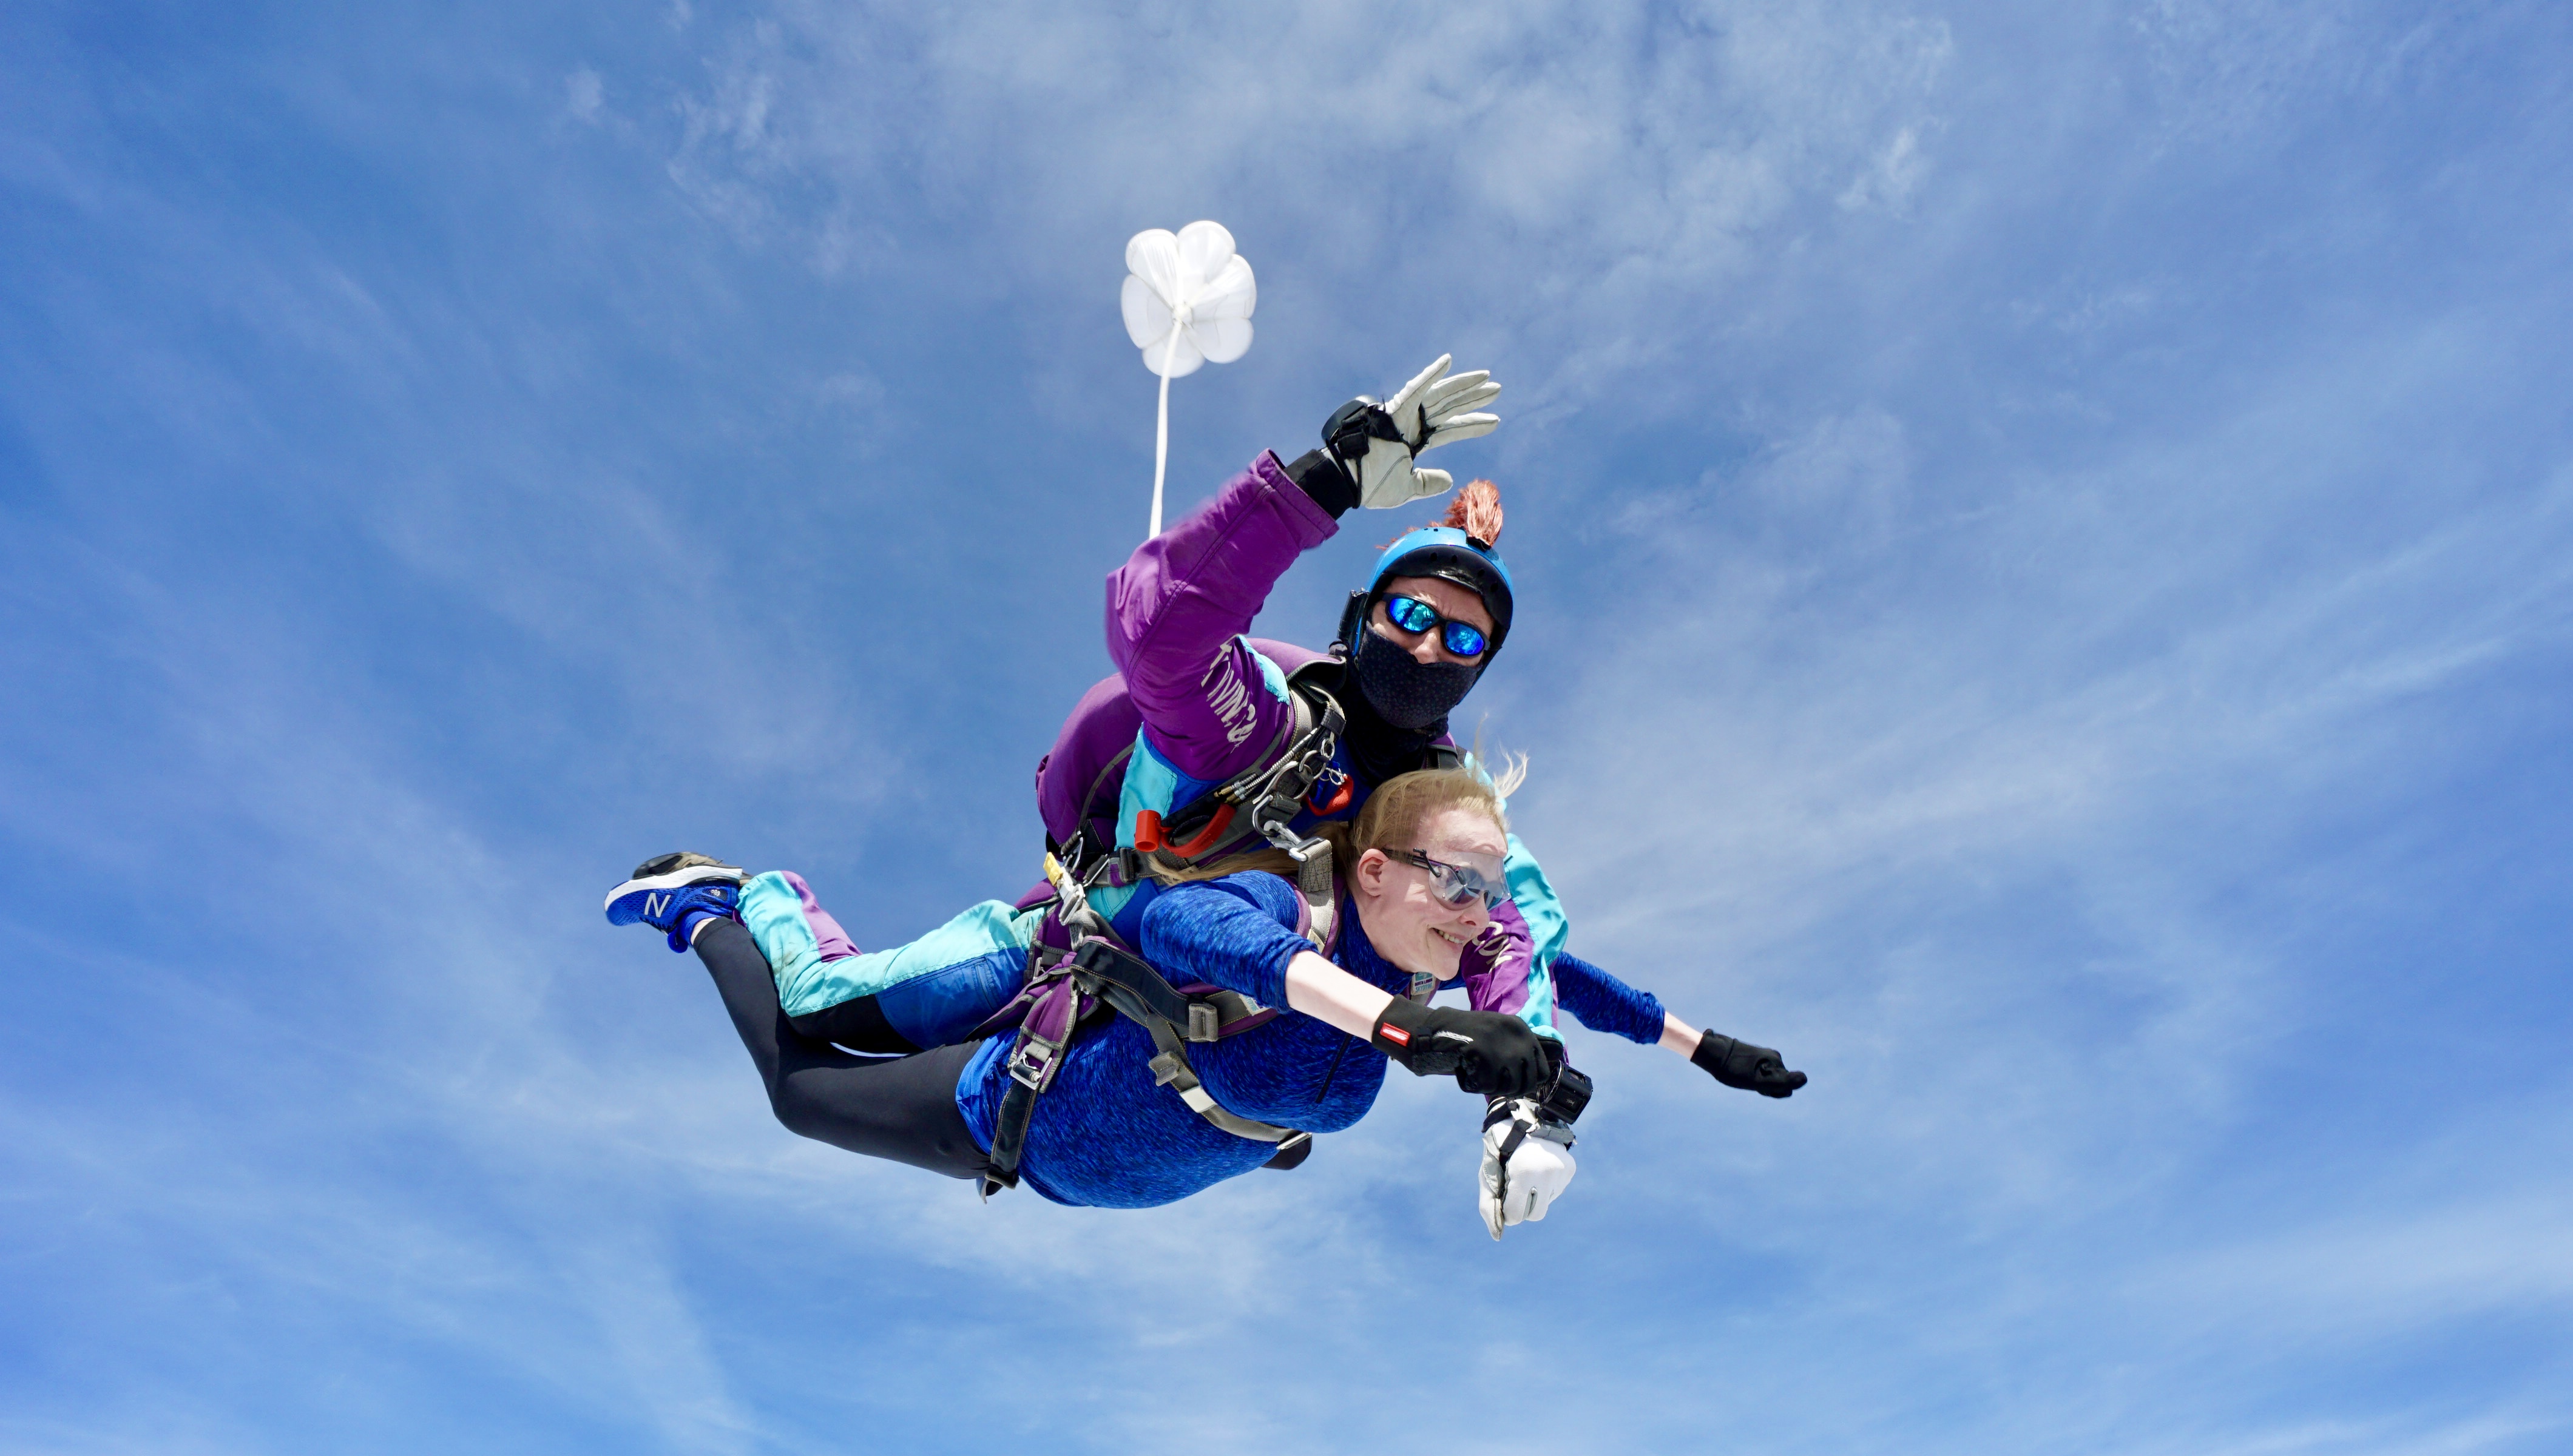 Headteacher Bridget Harrison resorted to a 15,000ft skydive to raise funds for school improvements, as there was was not enough cash in the school budget. (North London Skydiving Centre/ PA)